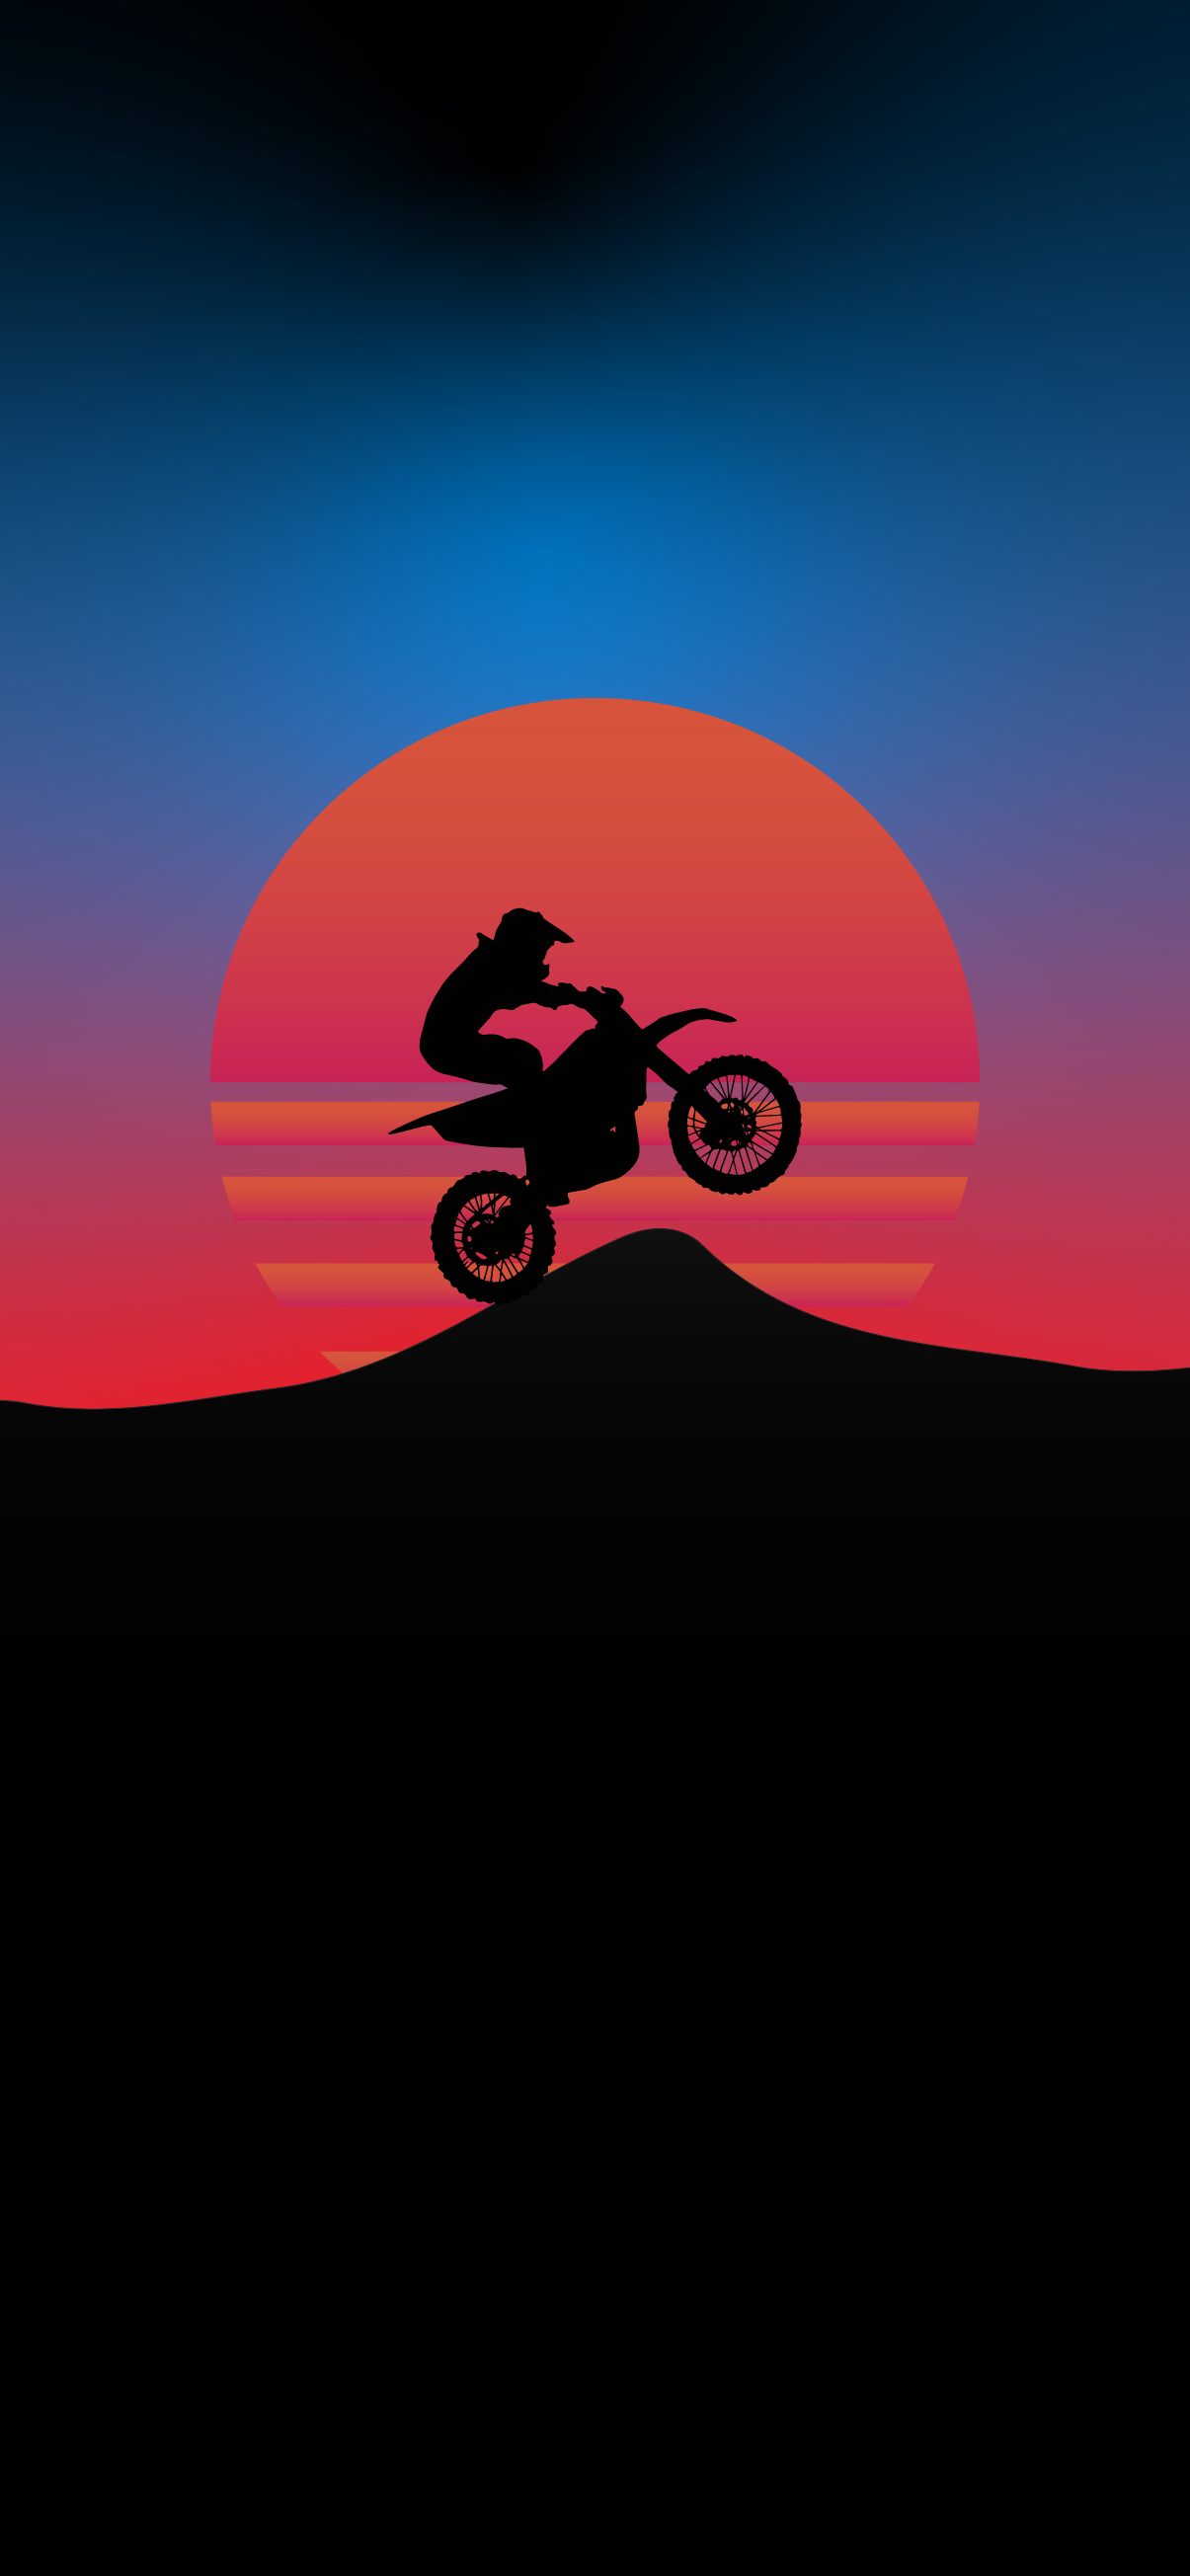 Synthwave motocross cool phone wallpaper